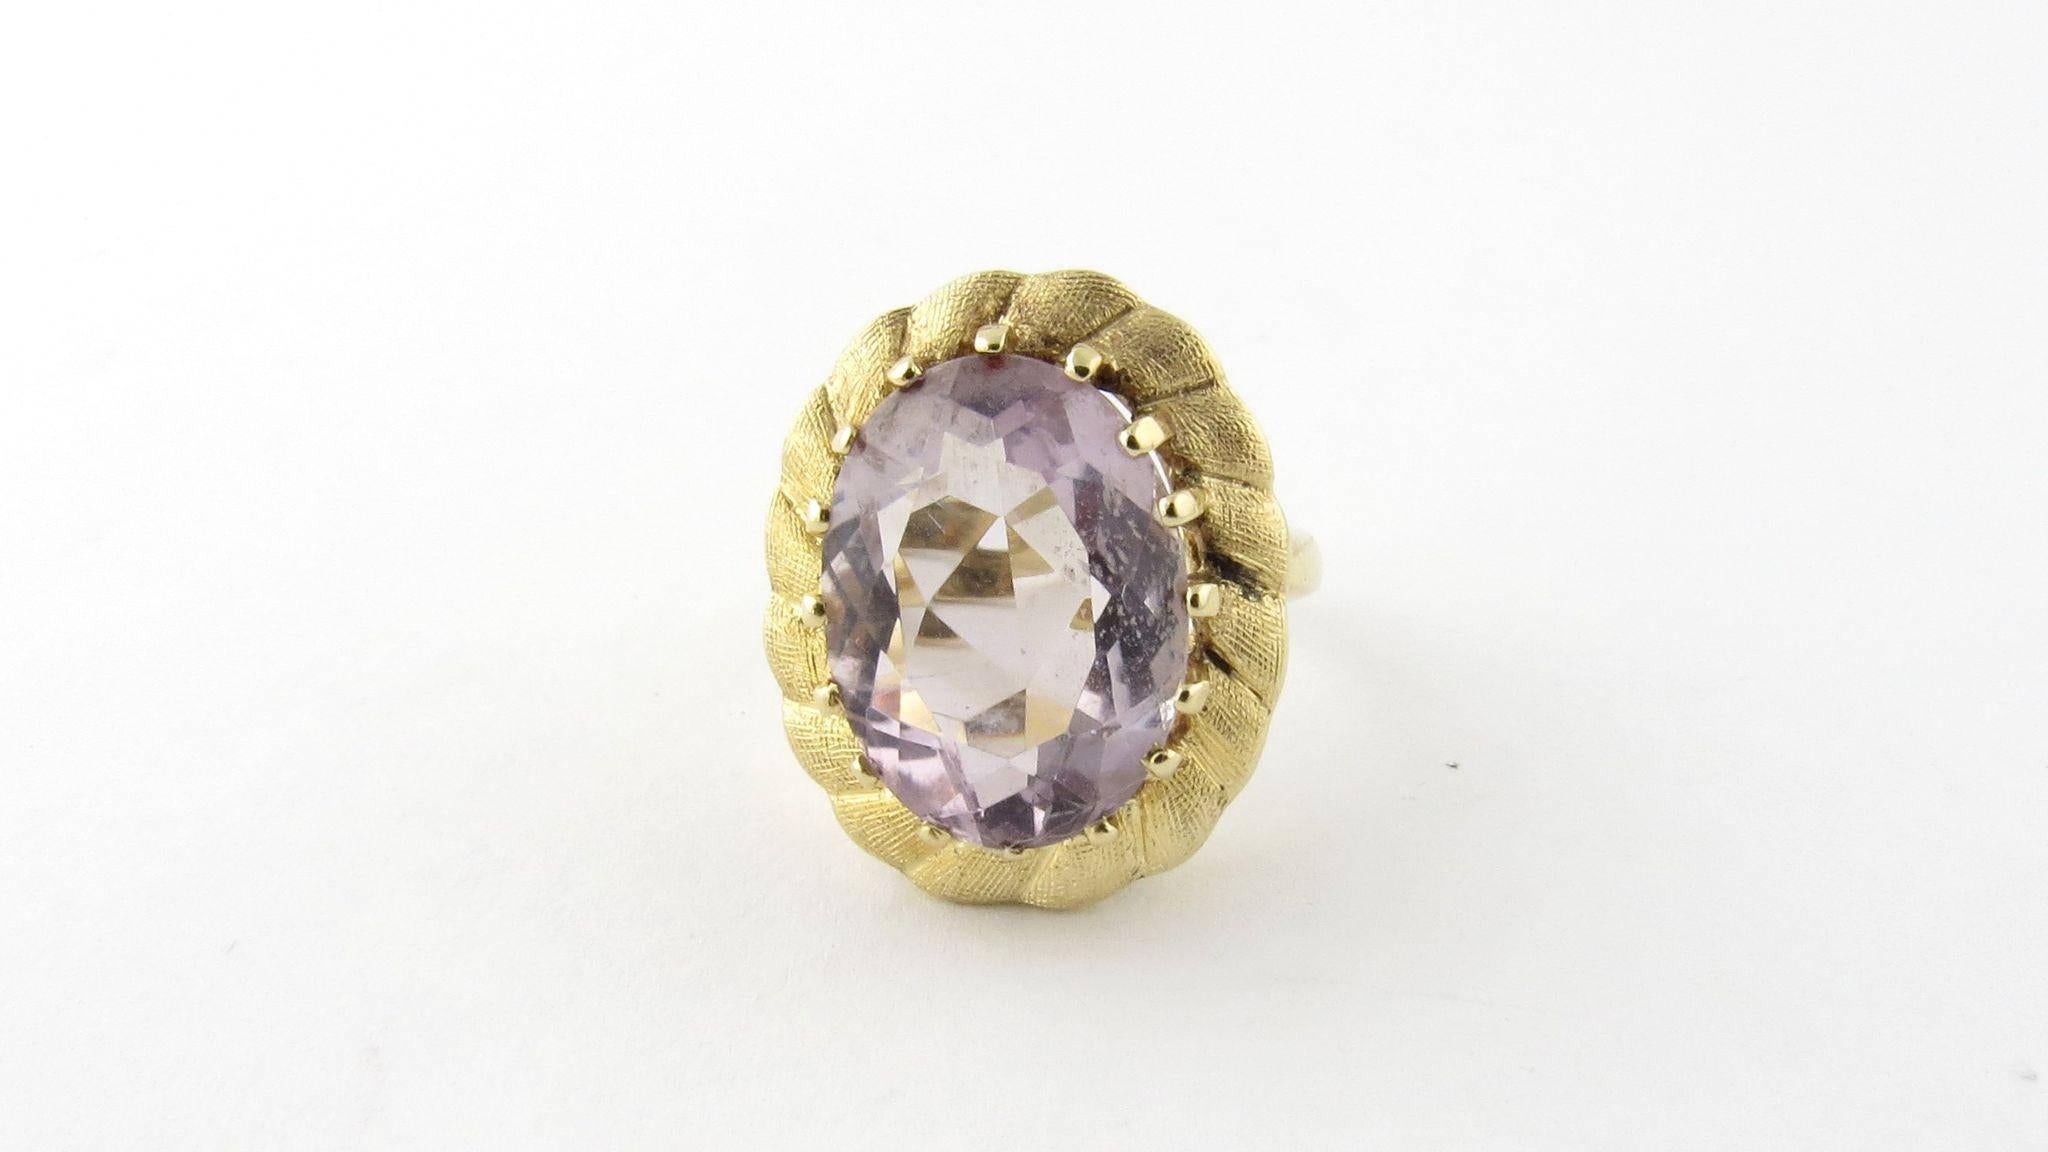 Vintage 14k Yellow Gold and Genuine Amethyst Ring Size 6.5 

This large cocktail style ring has a bright purple amethyst set in a pillow of gold. 

The amethyst is approximately 15 mm x 12 mm. It shows no signs of wear to the naked eye and just some